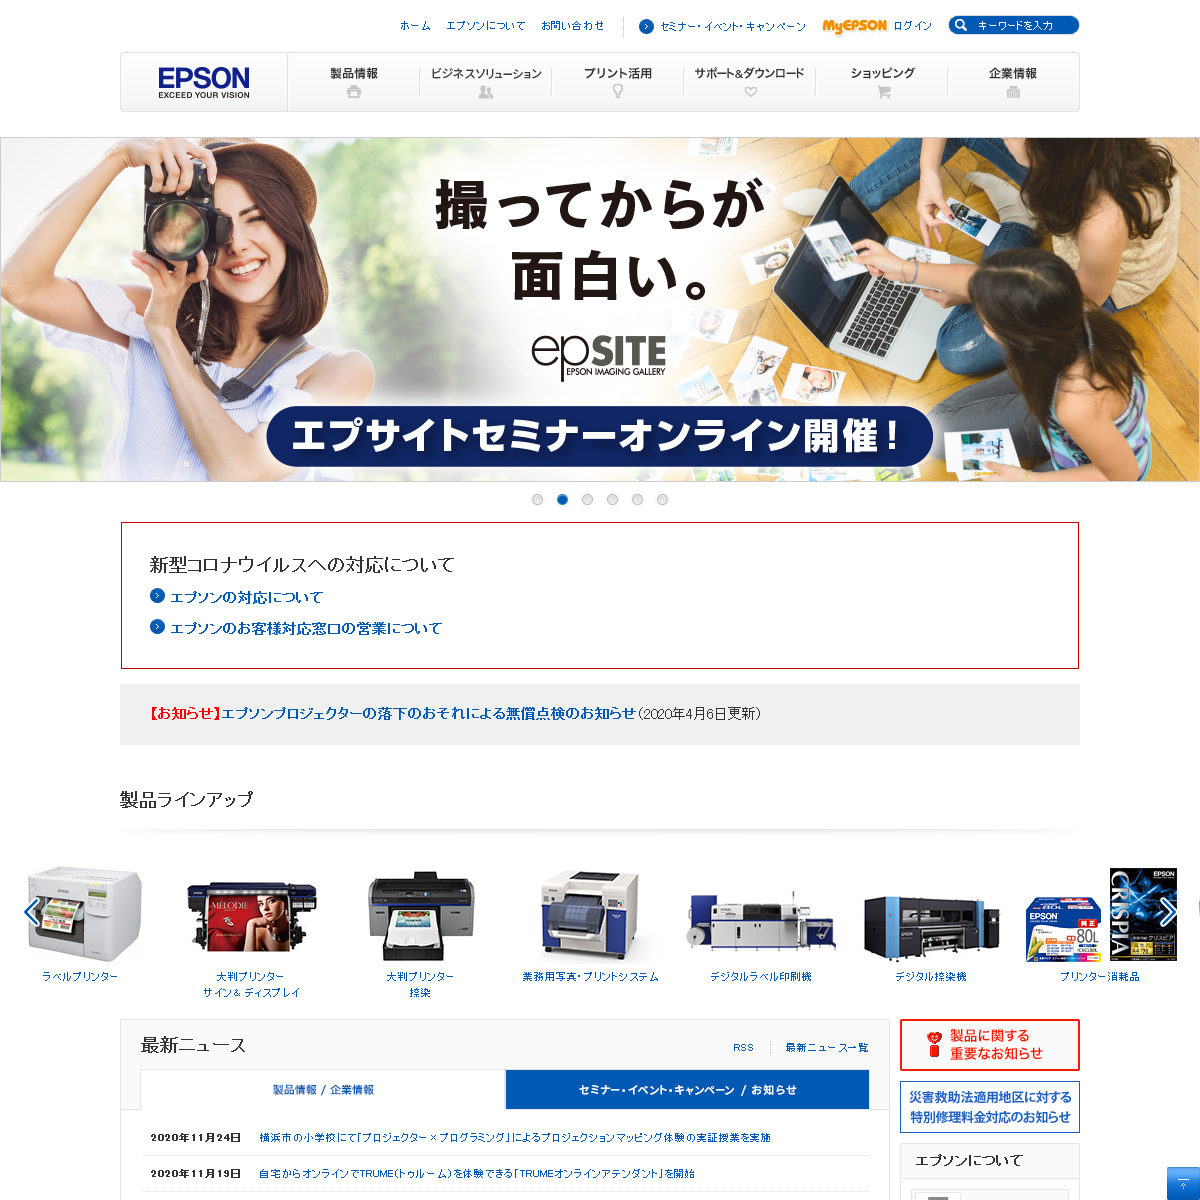 A complete backup of epson.jp